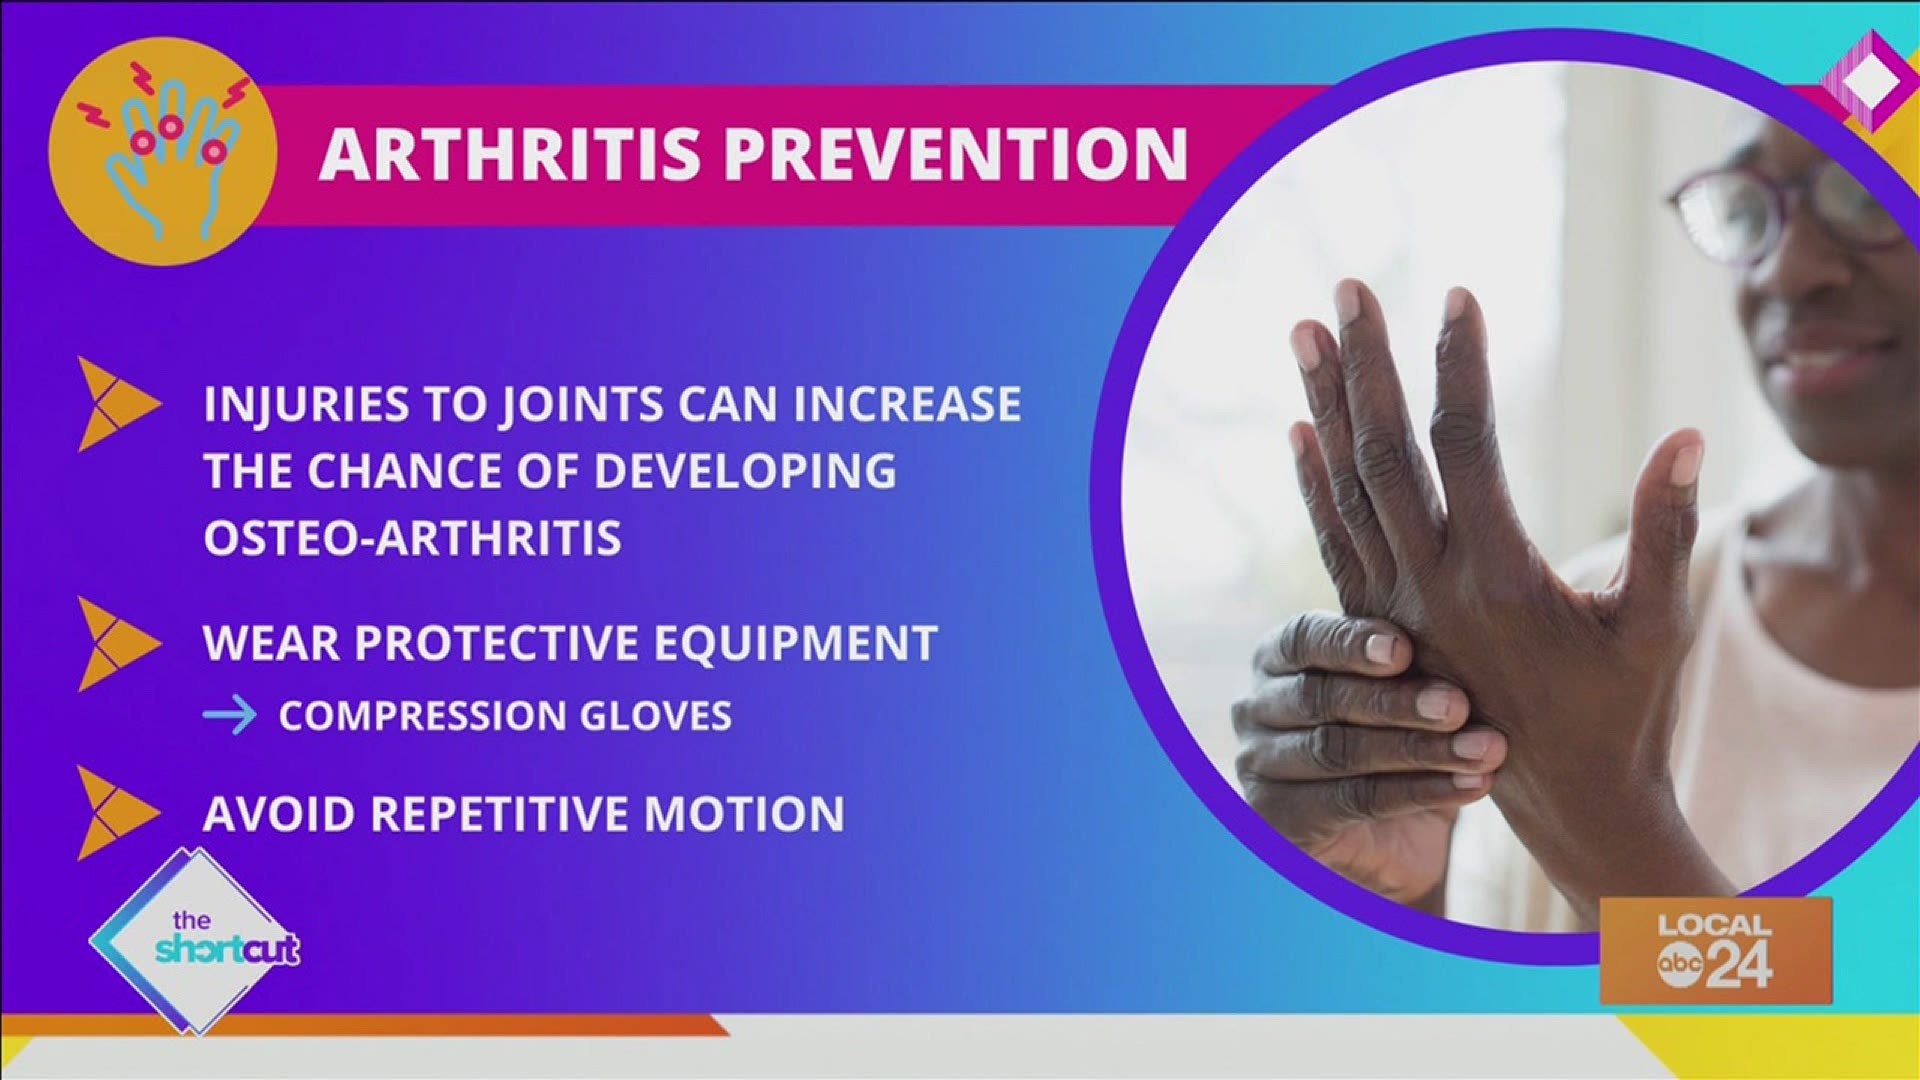 Whether you know someone with arthritis and/or have it yourself, check out these arthritis prevention tips! Starring Sydney Neely on "The Shortcut!"